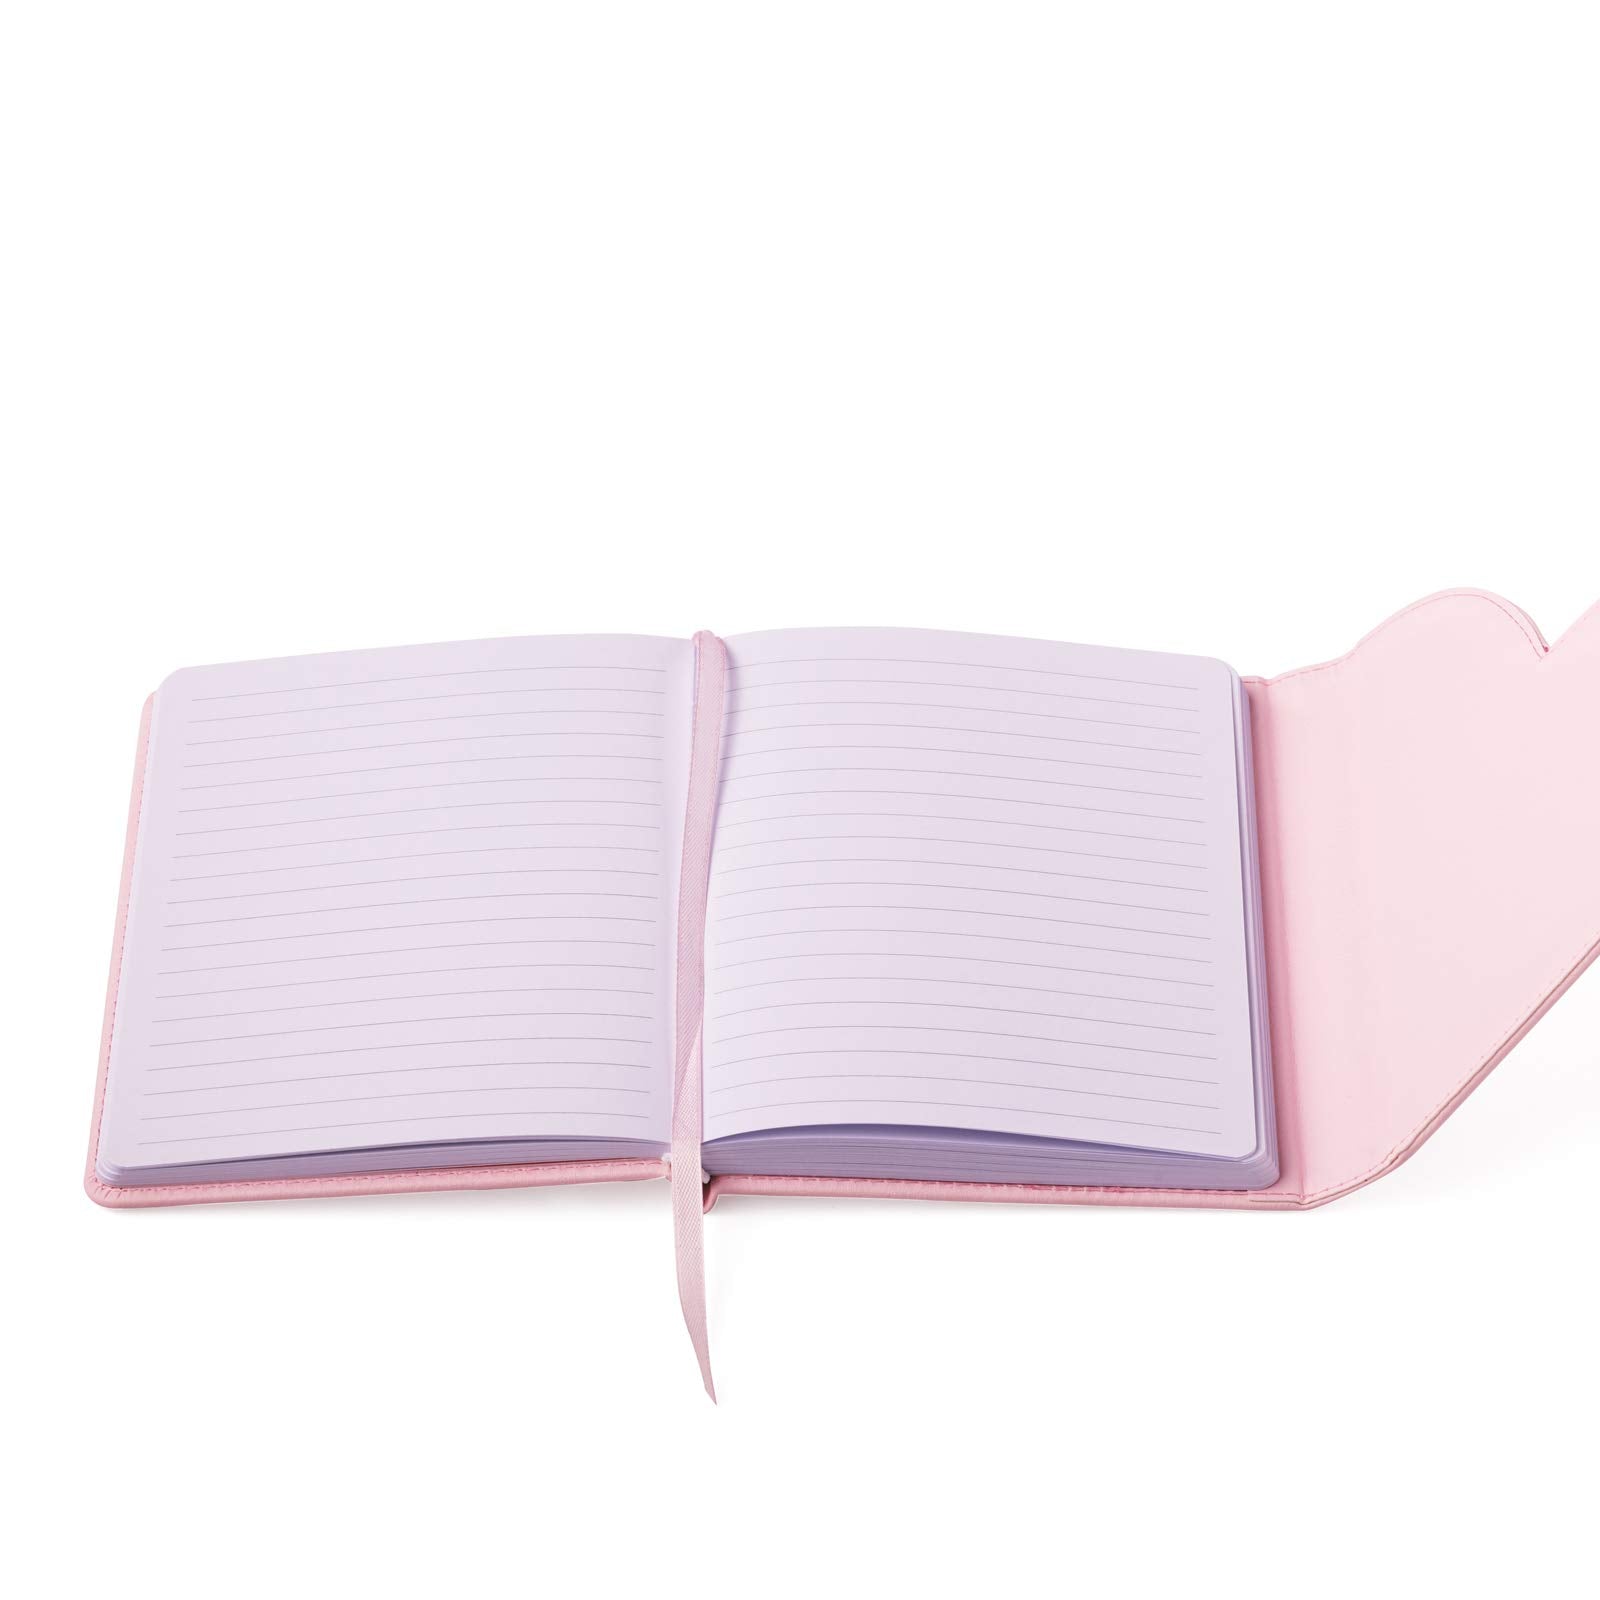 Eccolo Dayna Lee Love Journal in Light Pink Color